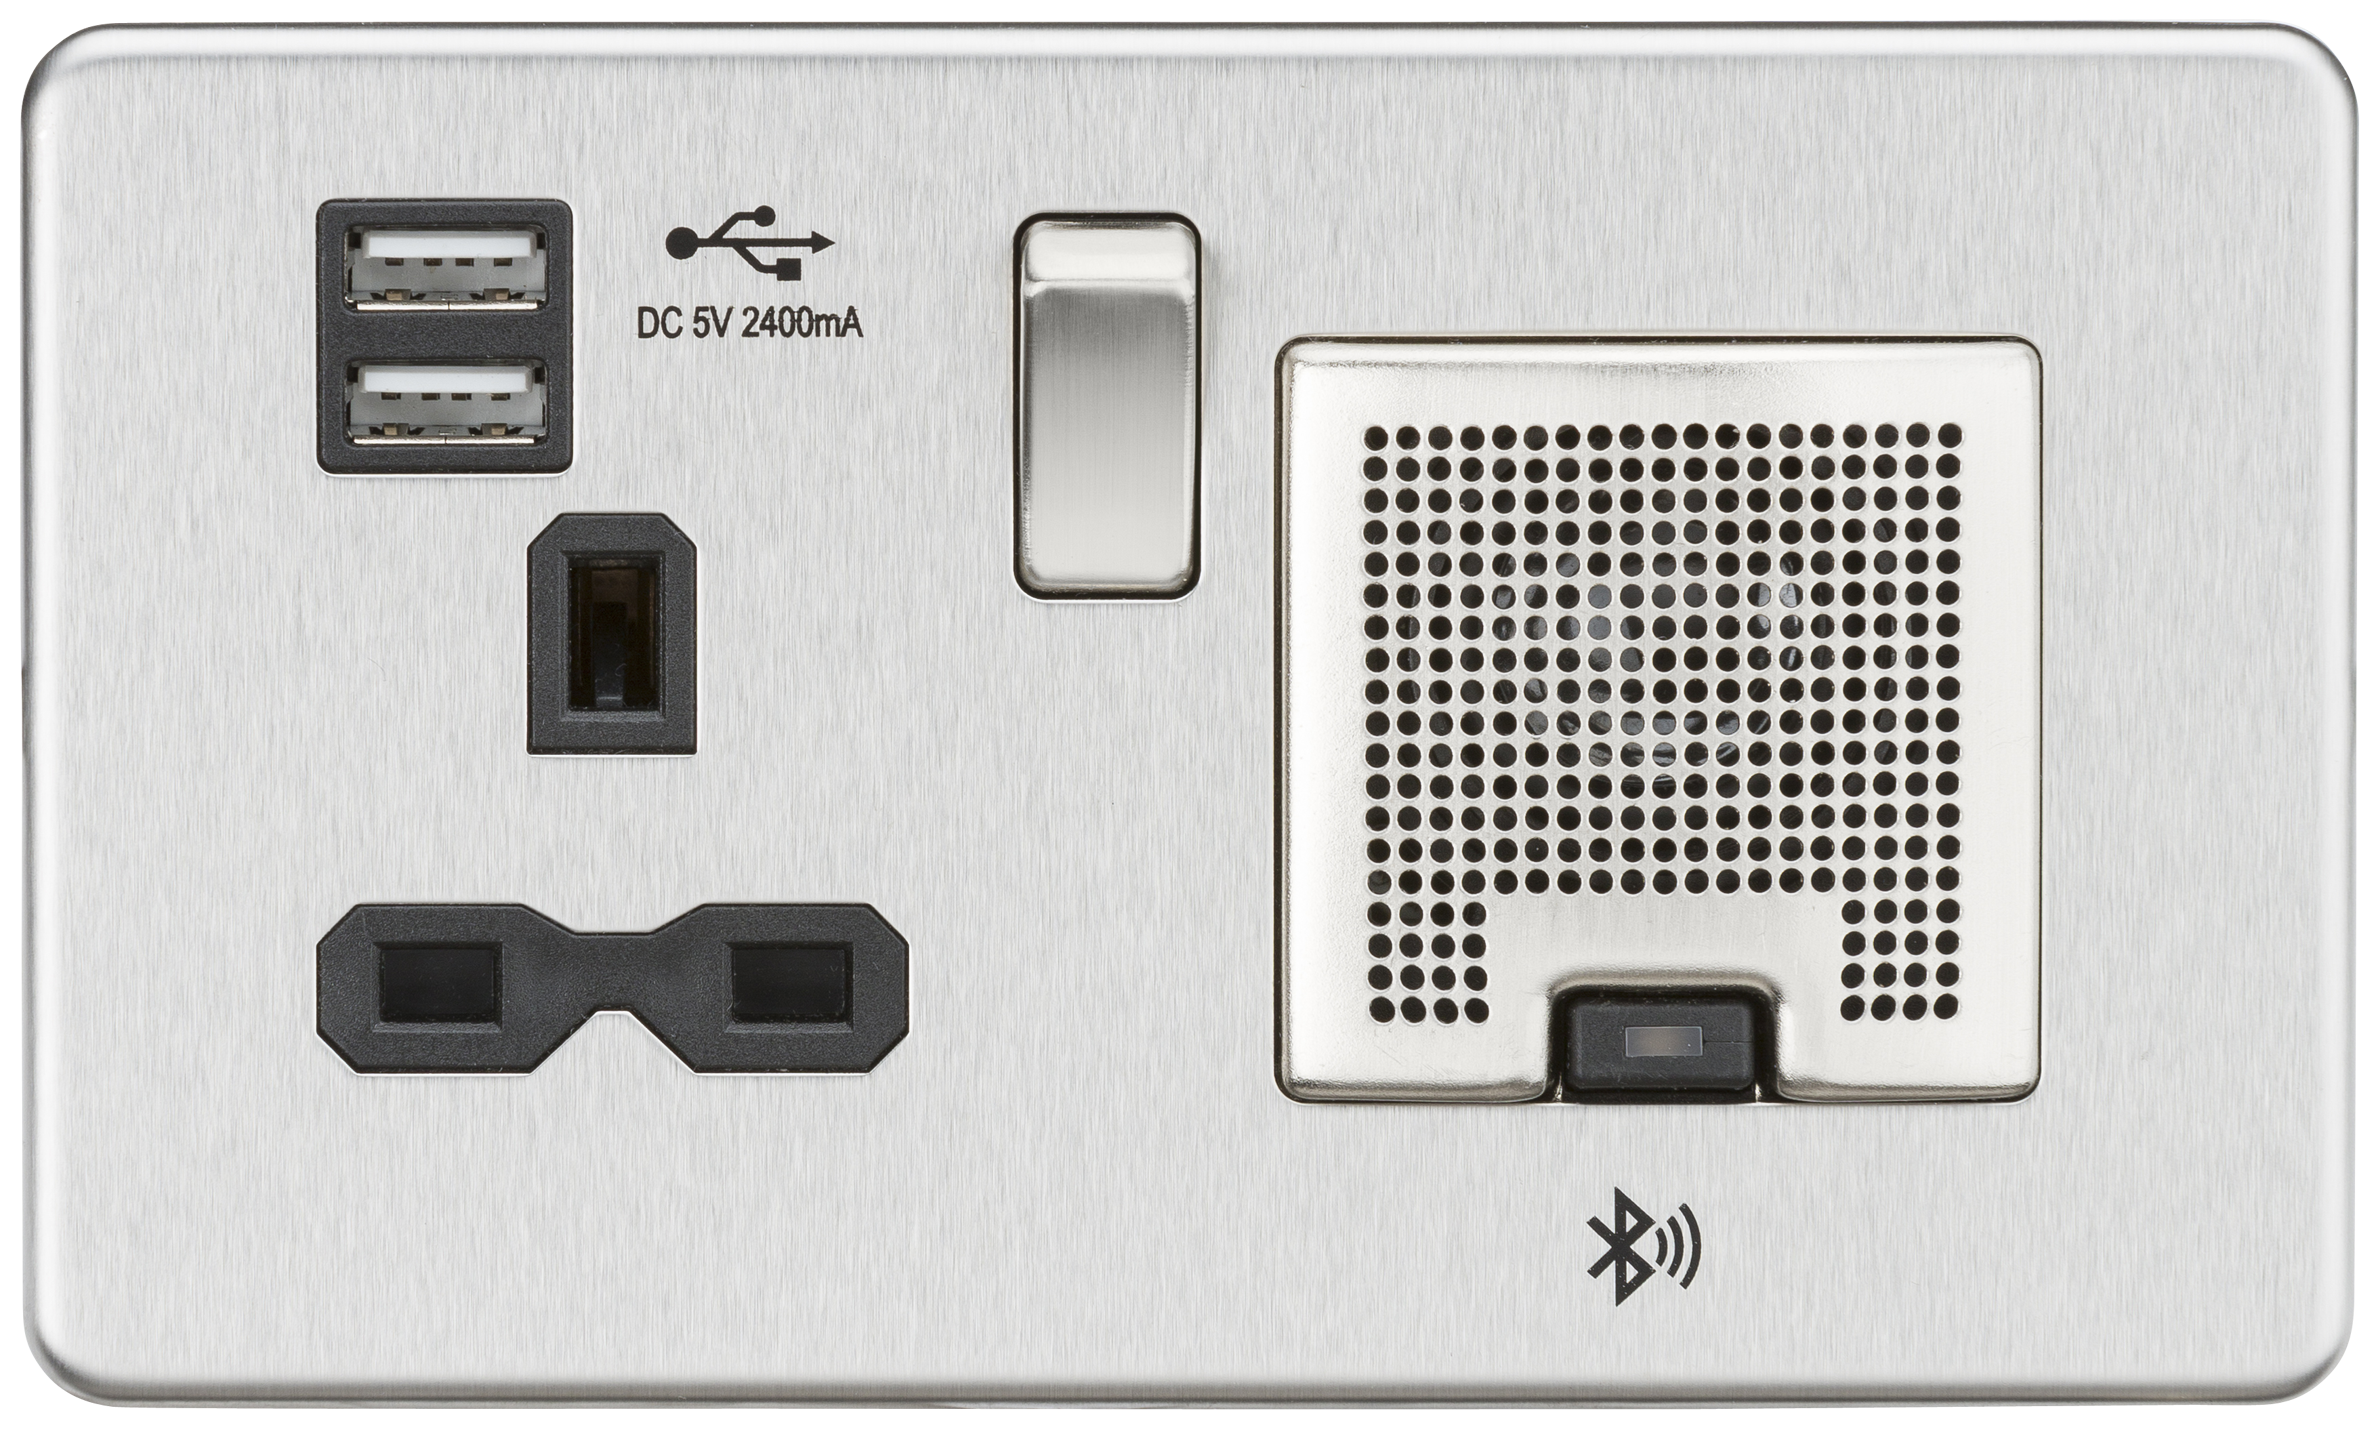 Screwless 13A Socket, USB Charger And Bluetooth Speaker Combo - Brushed Chrome With Black Insert - SFR9905BC 